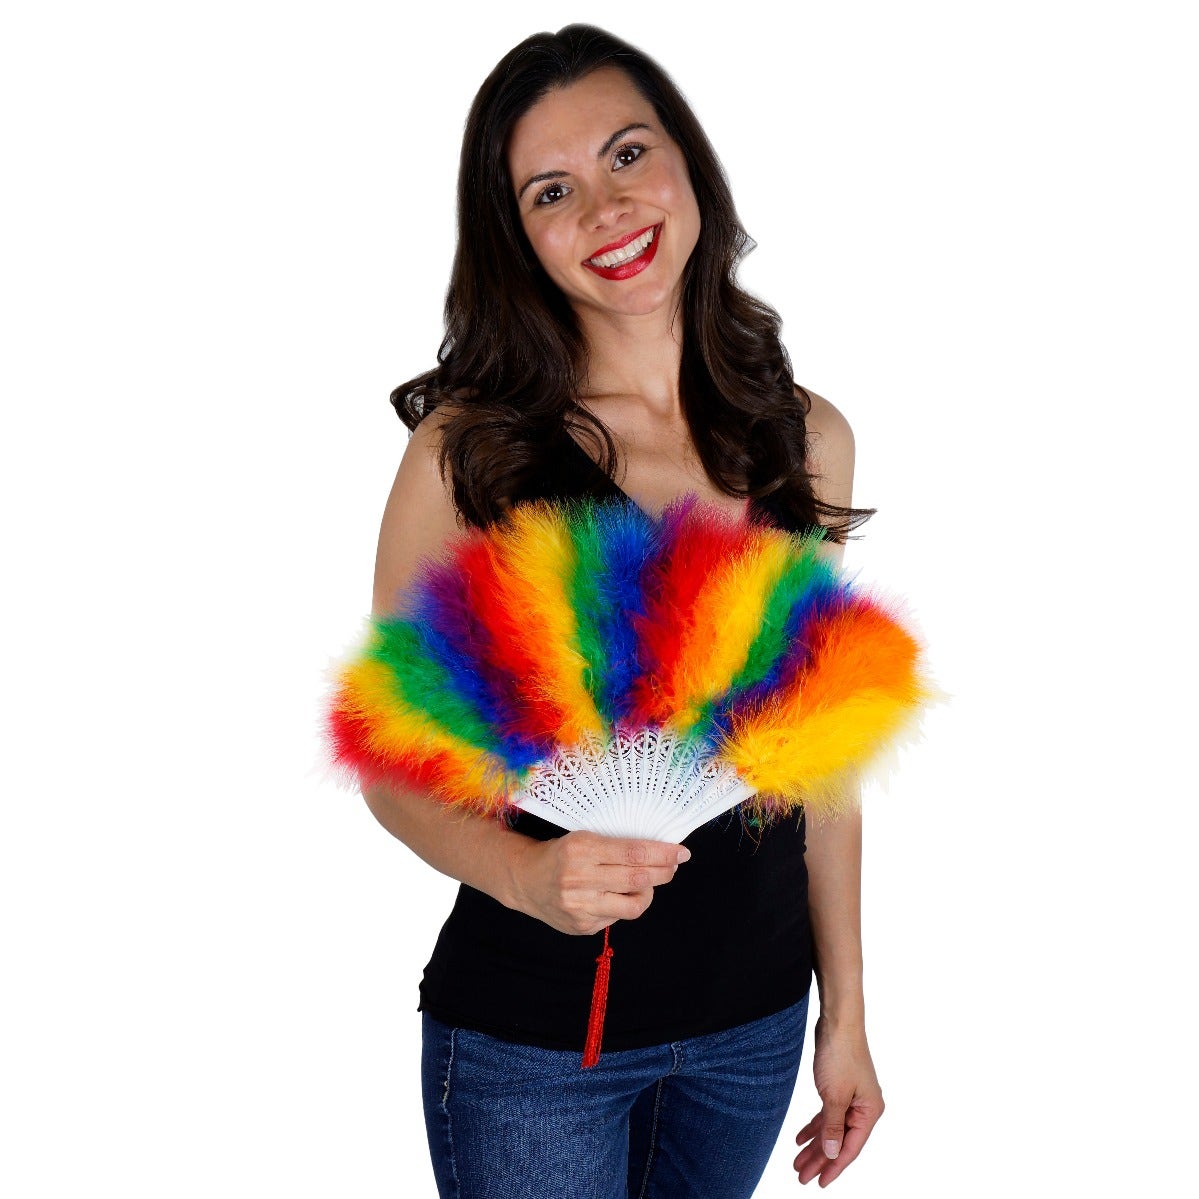 Marabou Feather Fan Sectional - Rainbow Mix